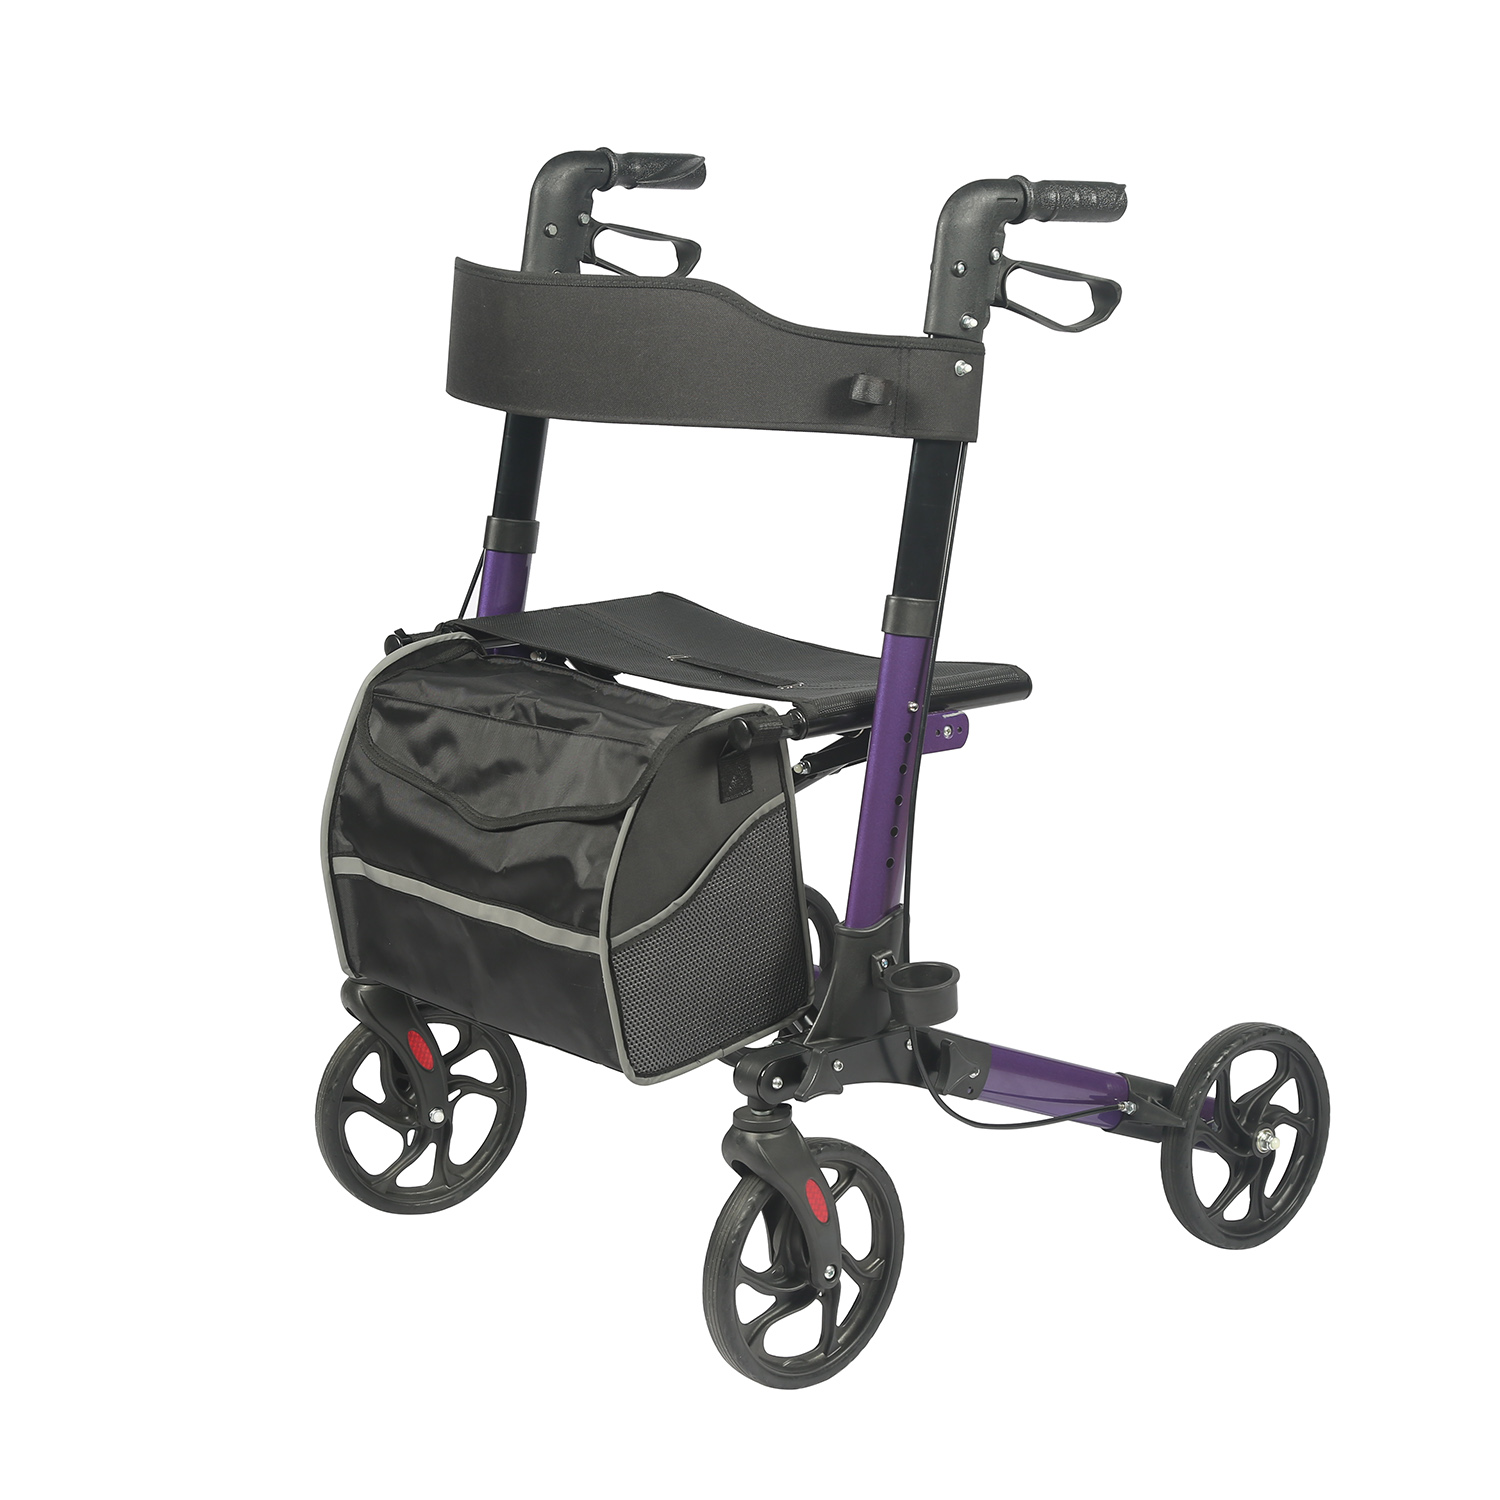 Rehabilitation Therapy Supplies Folding Adult Mobility Rollator Walker Disability